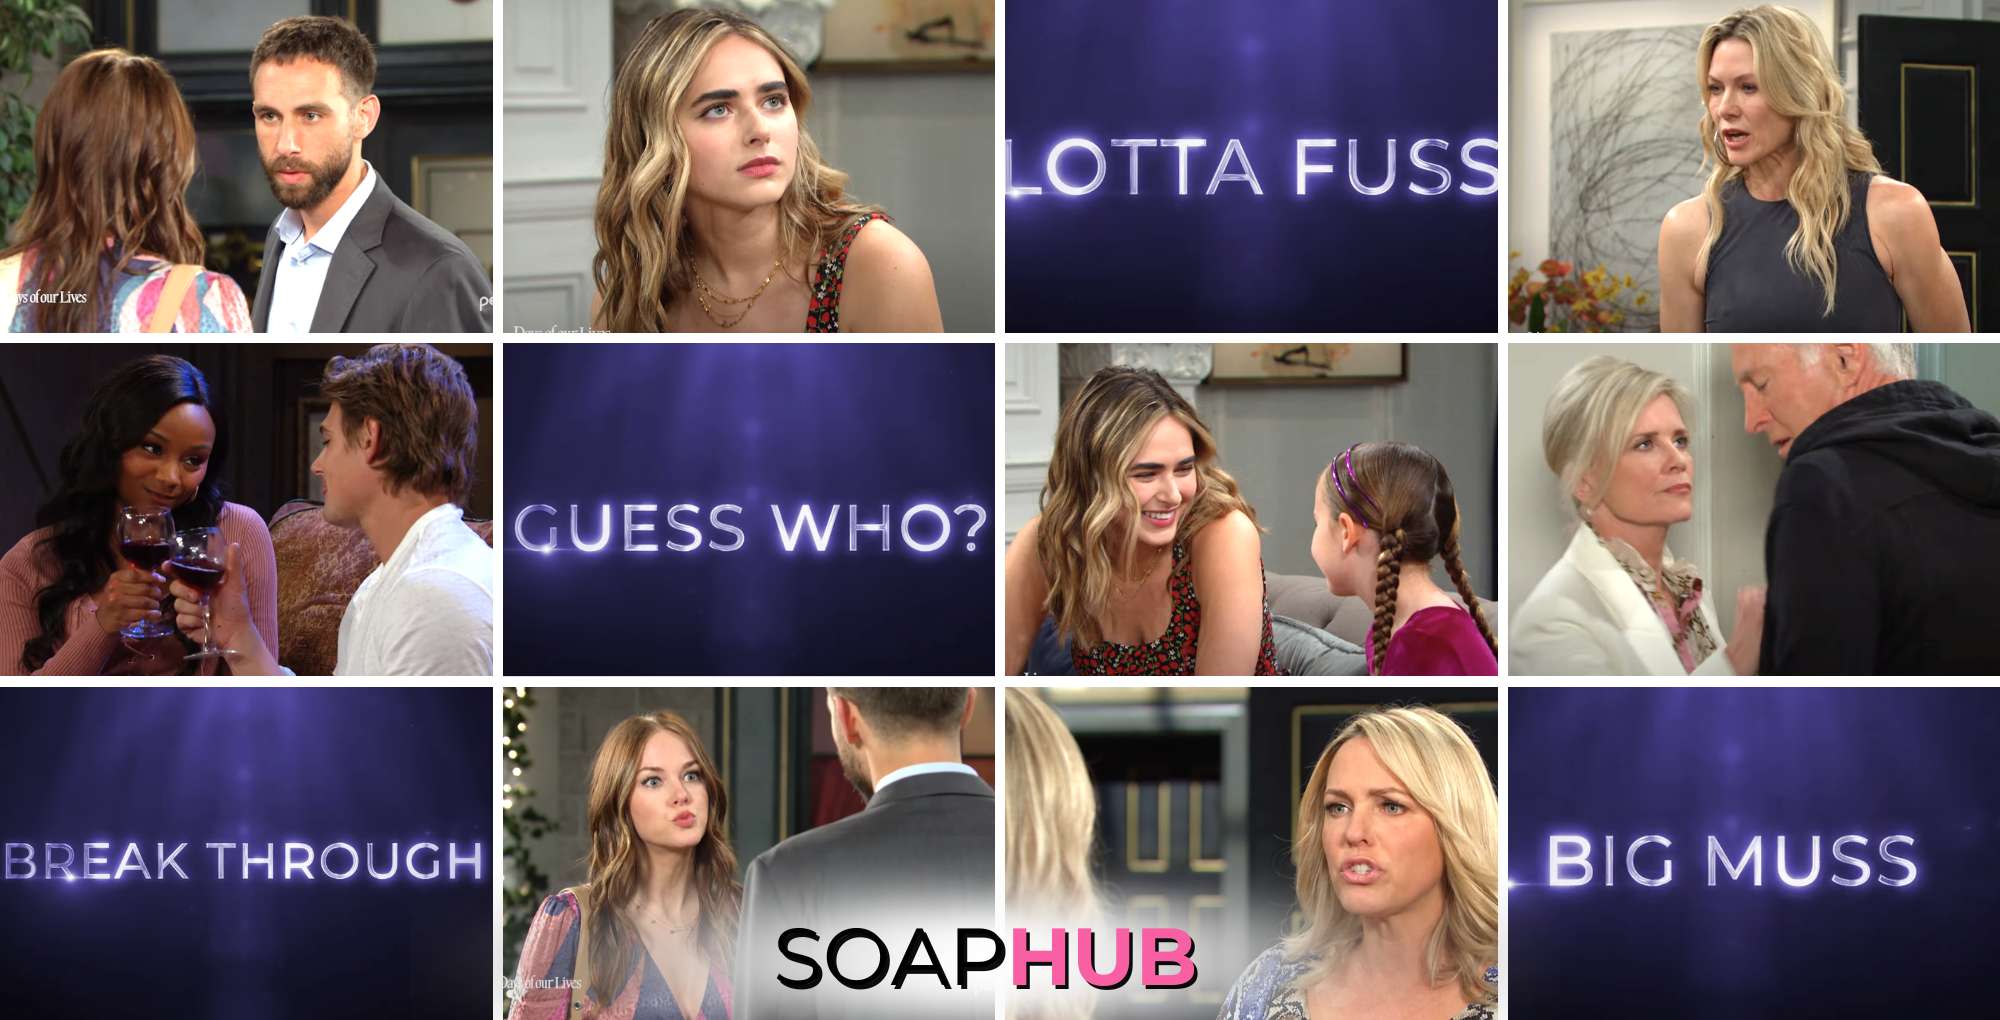 Days of our Lives spoilers weekly preview video with the Soap Hub logo across the bottom.